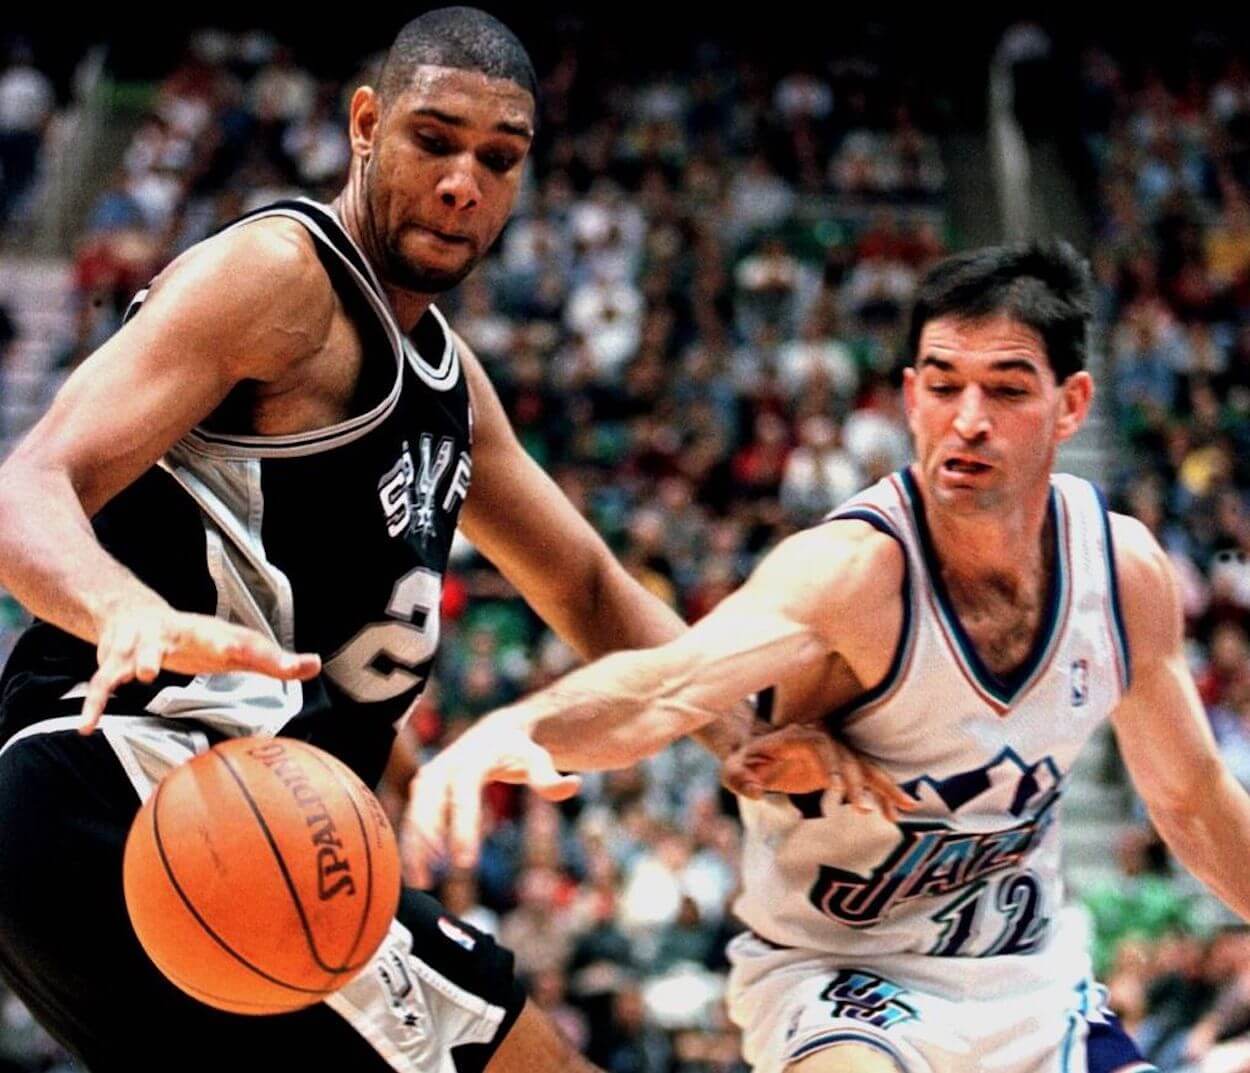 John Stockton steals the ball from Tim Duncan during an NBA game.